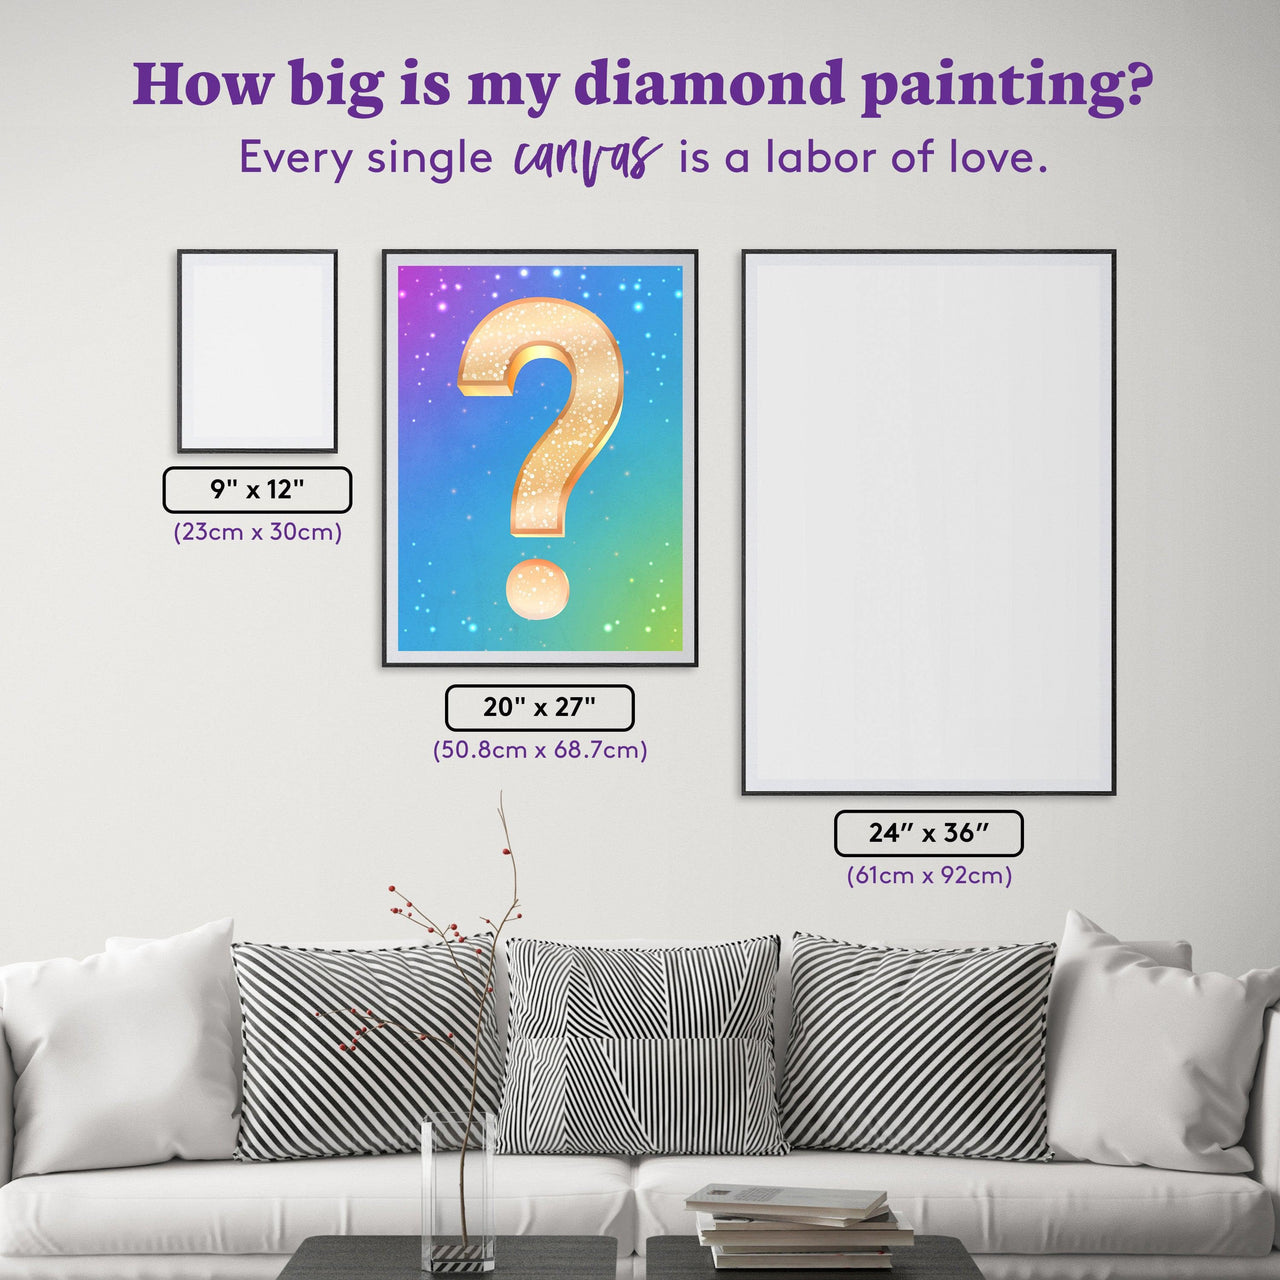 Diamond Painting Mystery Kit #29 - Abstract 20" x 27" (50.8cm x 68.7cm) / Square with 42 Colors including 4 ABs / 56,304